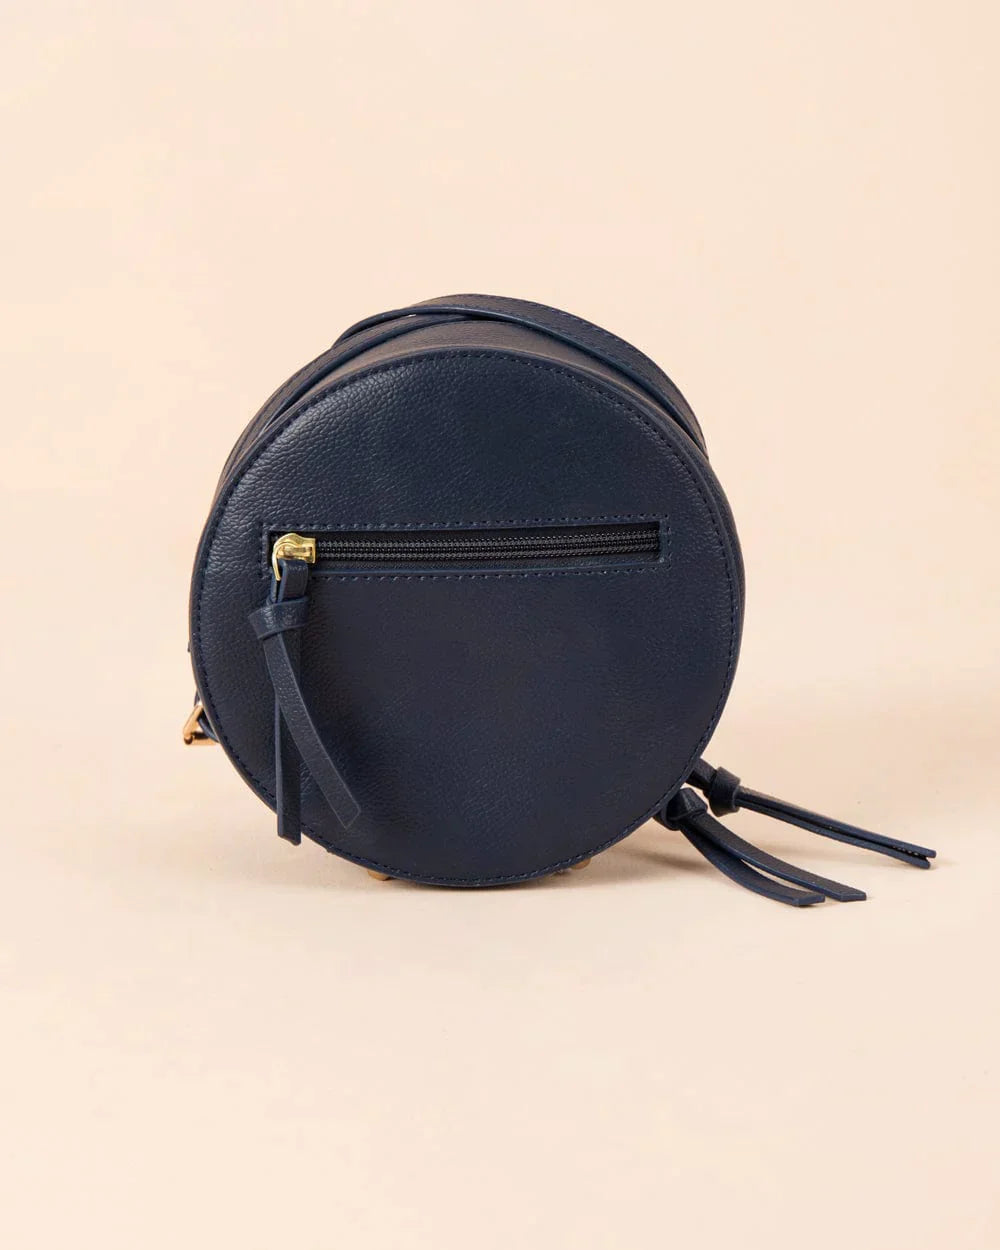 Your Own Thing Embroidered Sling Bag - Navy Blue - Chumbak